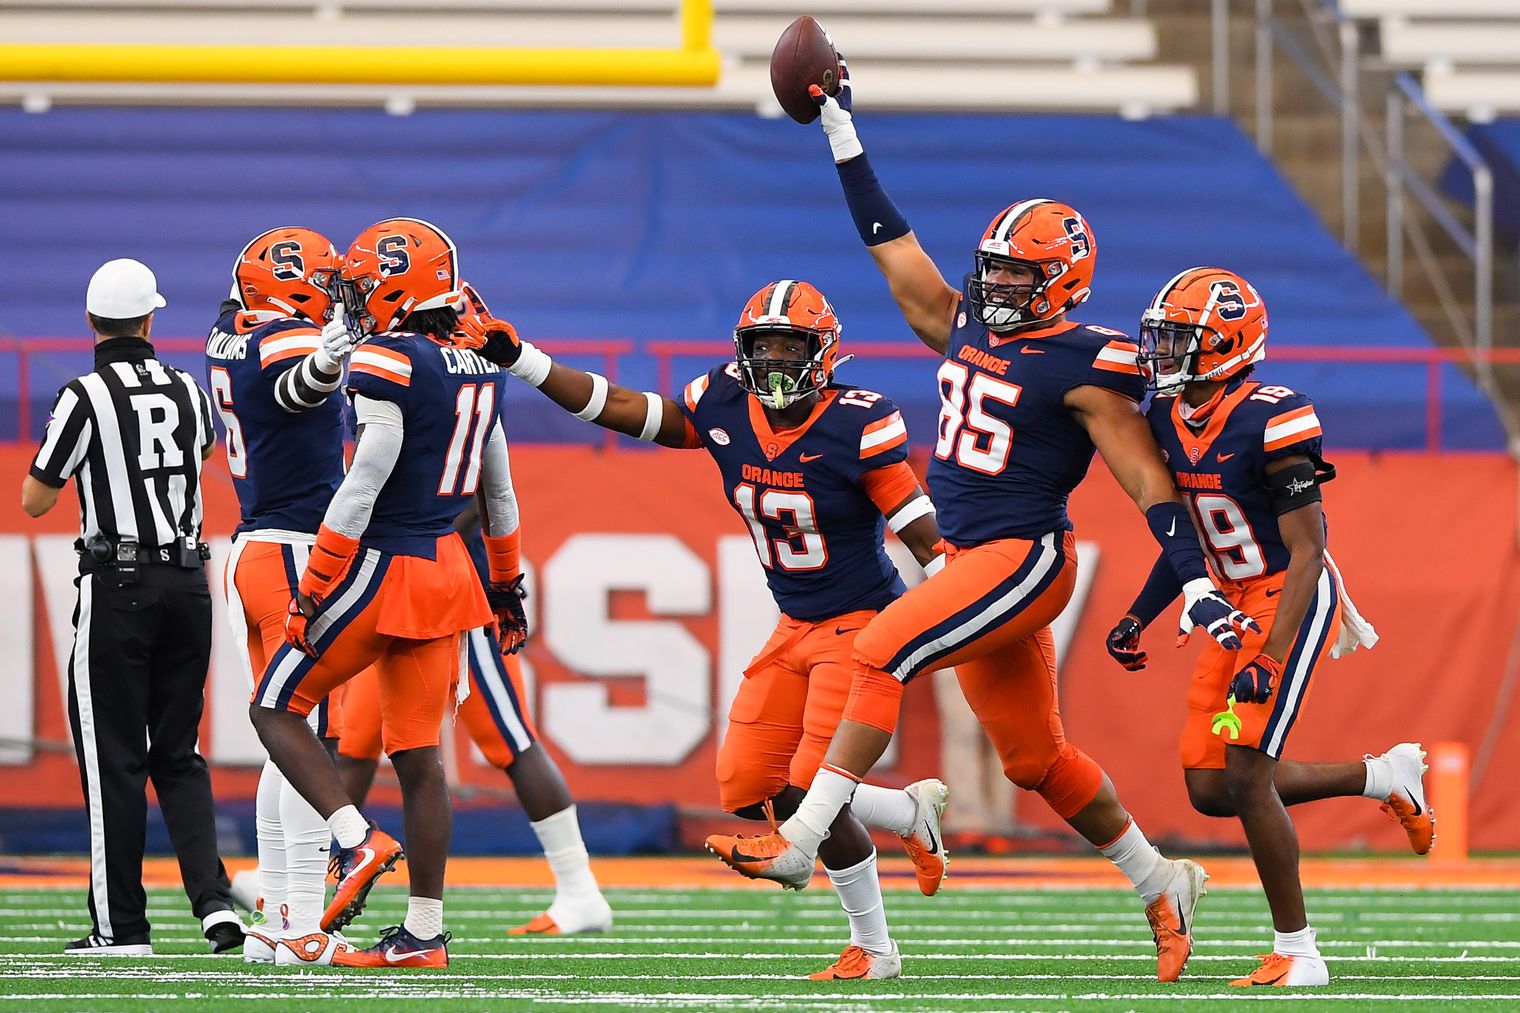 Syracuse Player Opts Out For NFL Draft